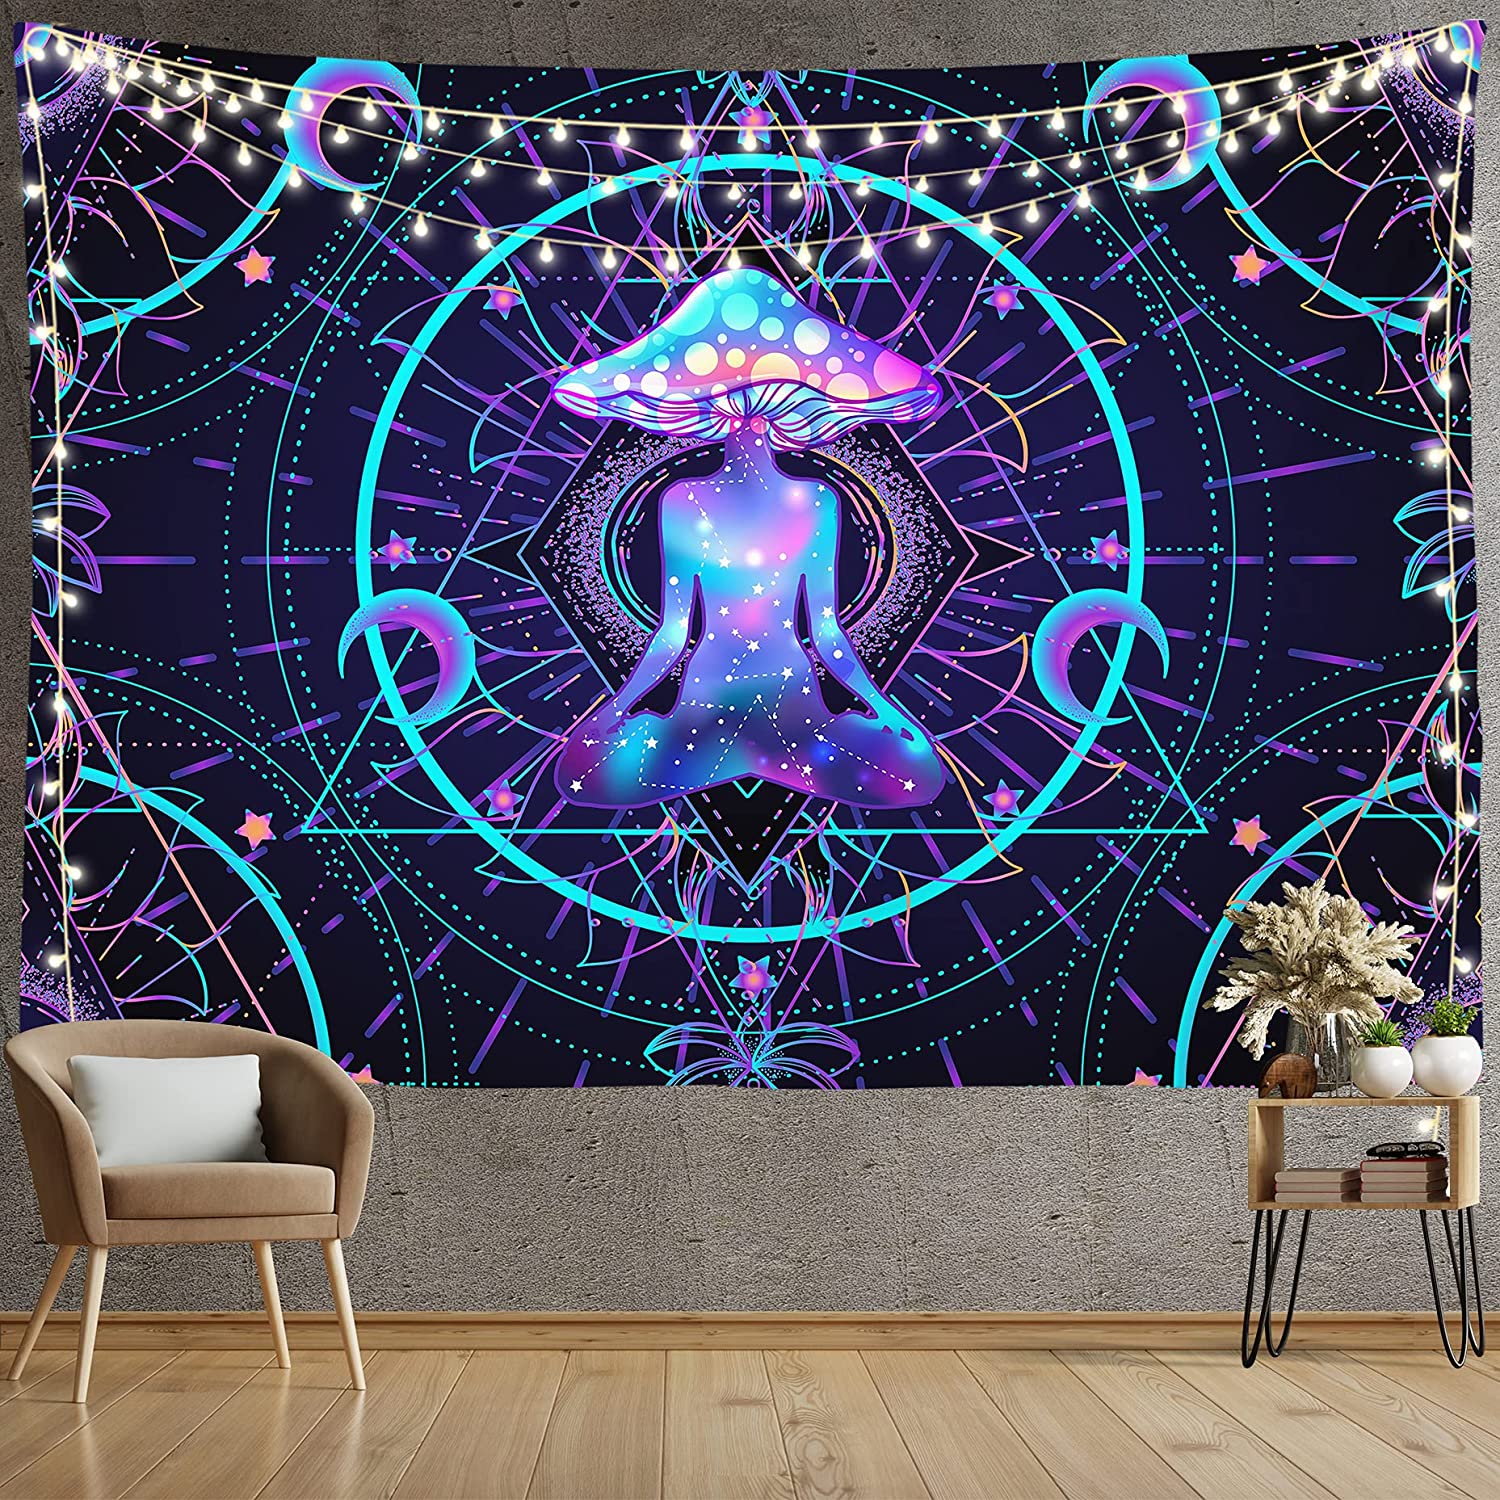 Trippy Tapestry Psychedelic Wall Hanging Mushroom Chakra Wall Blanket Decor for Home, Bedroom, Living Room and Dorm